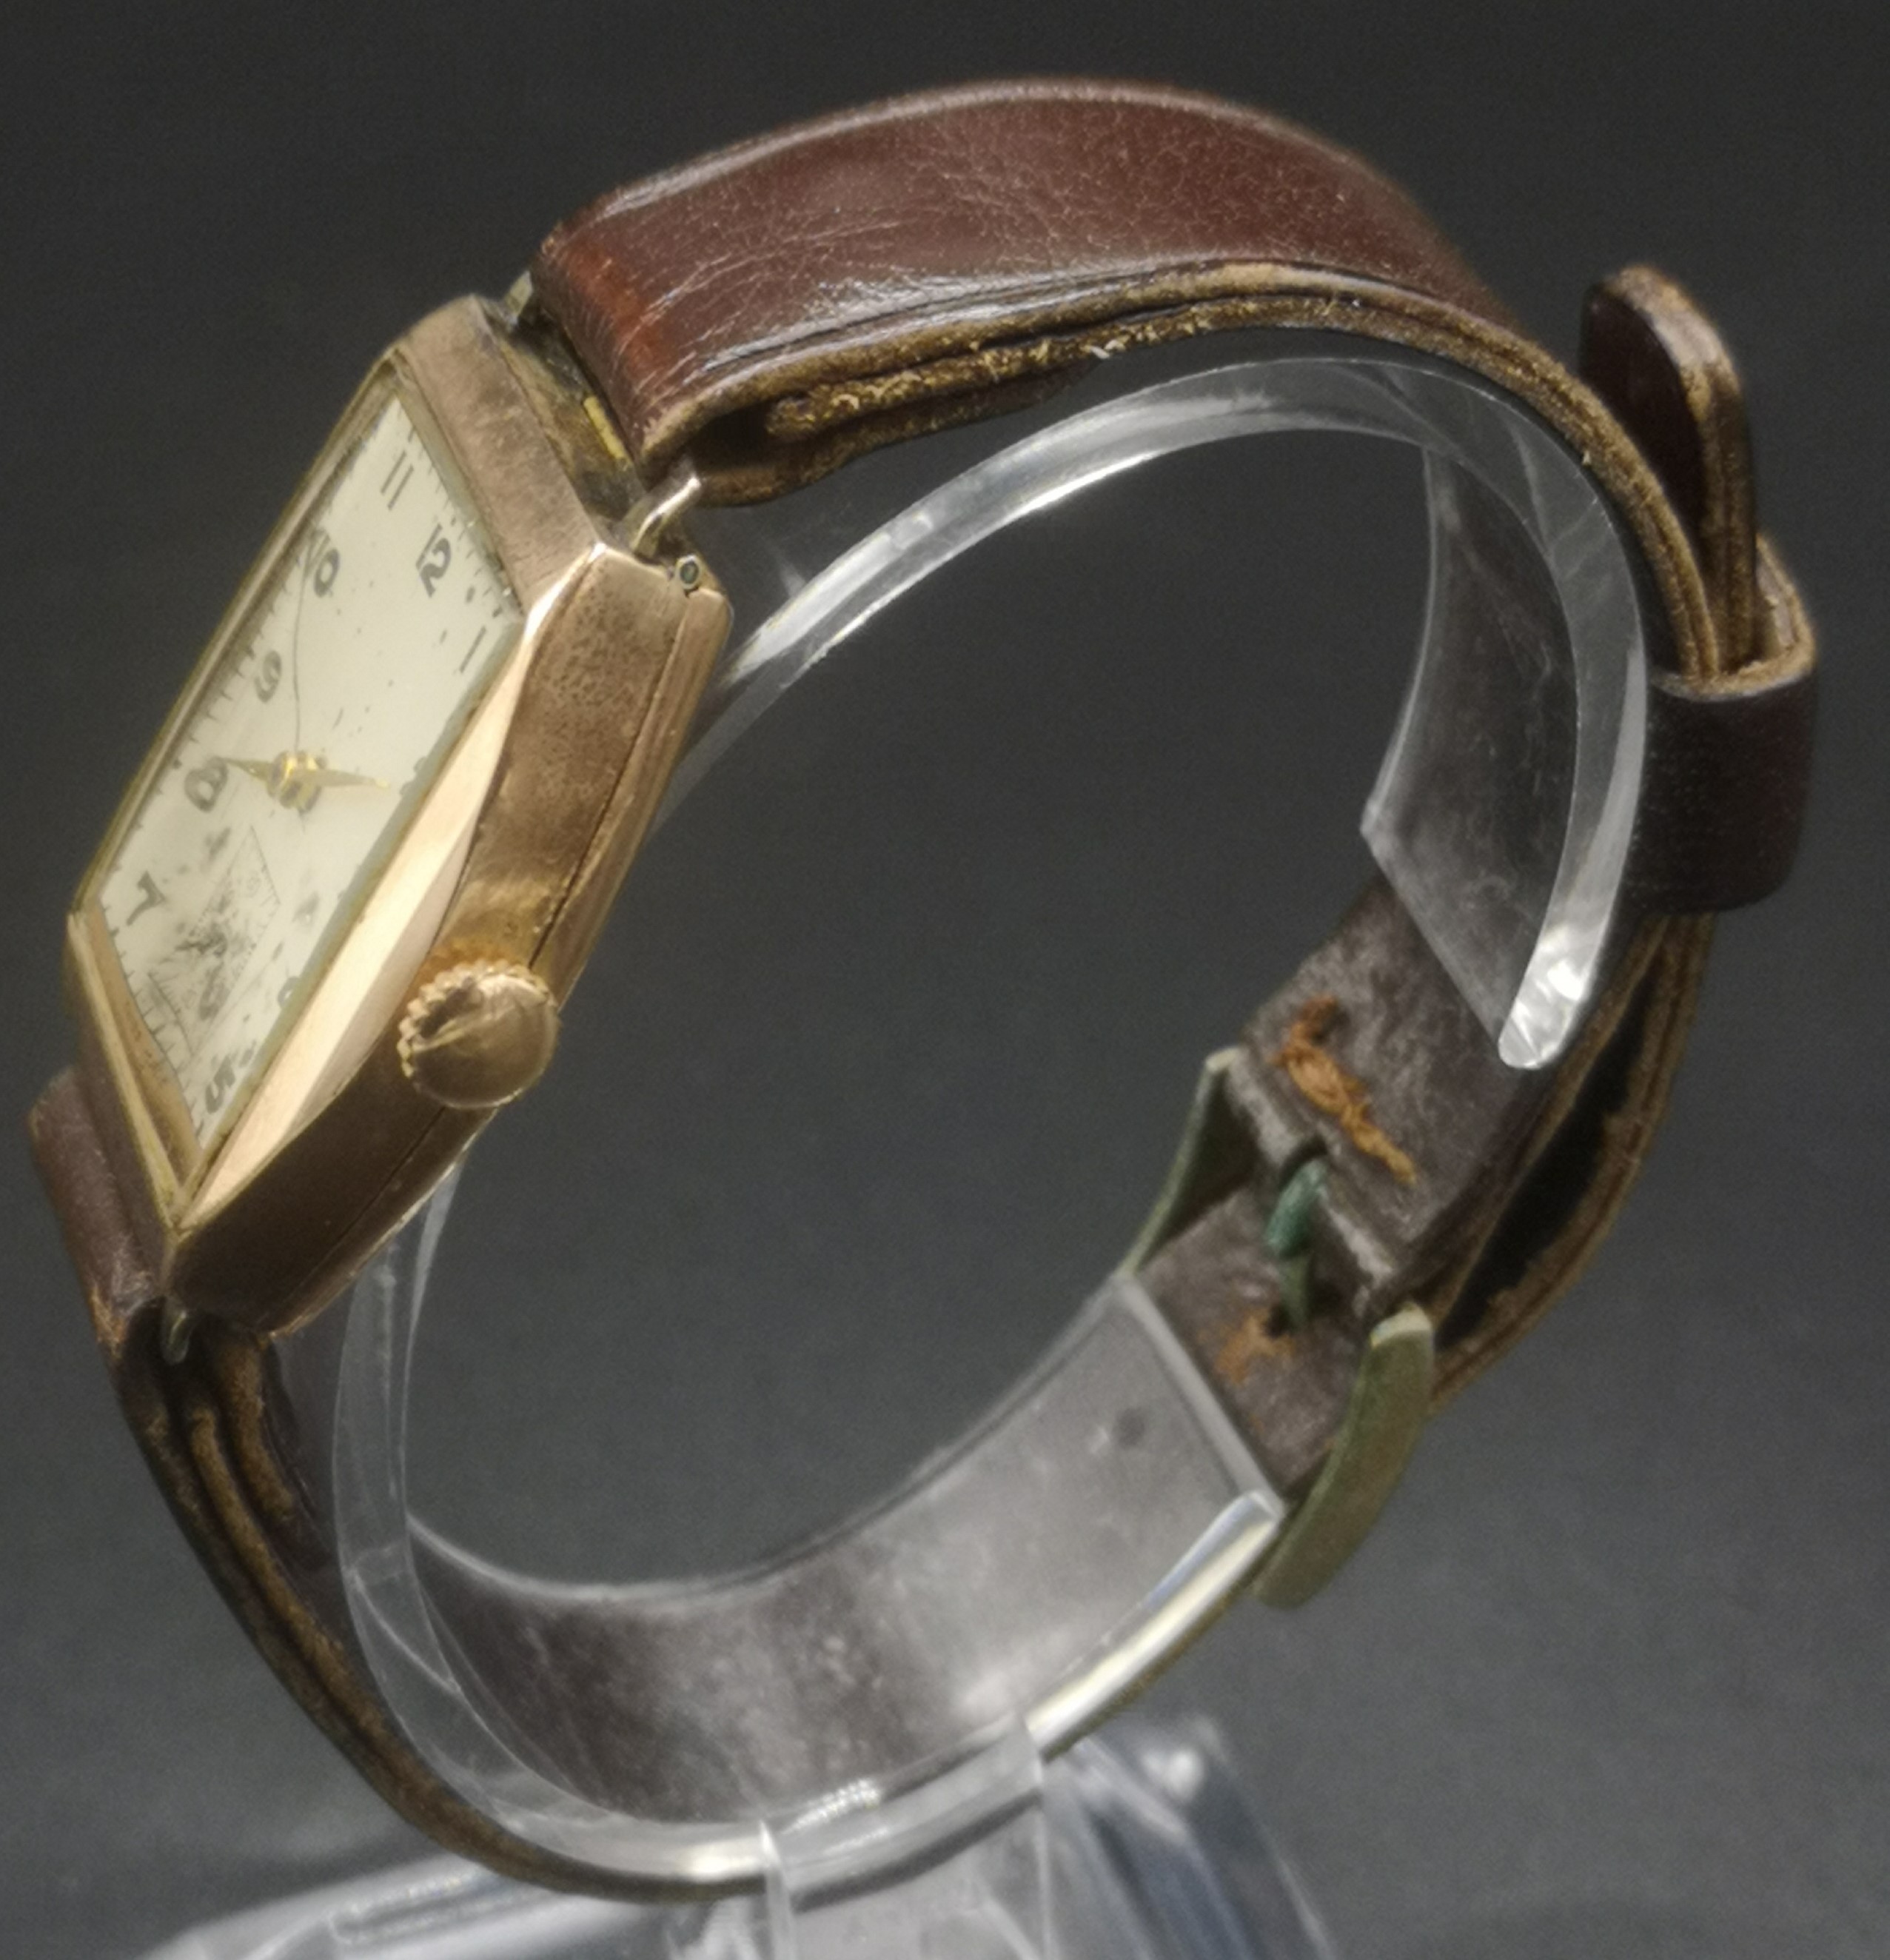 Gents wrist watch in 9ct gold case - Image 7 of 9